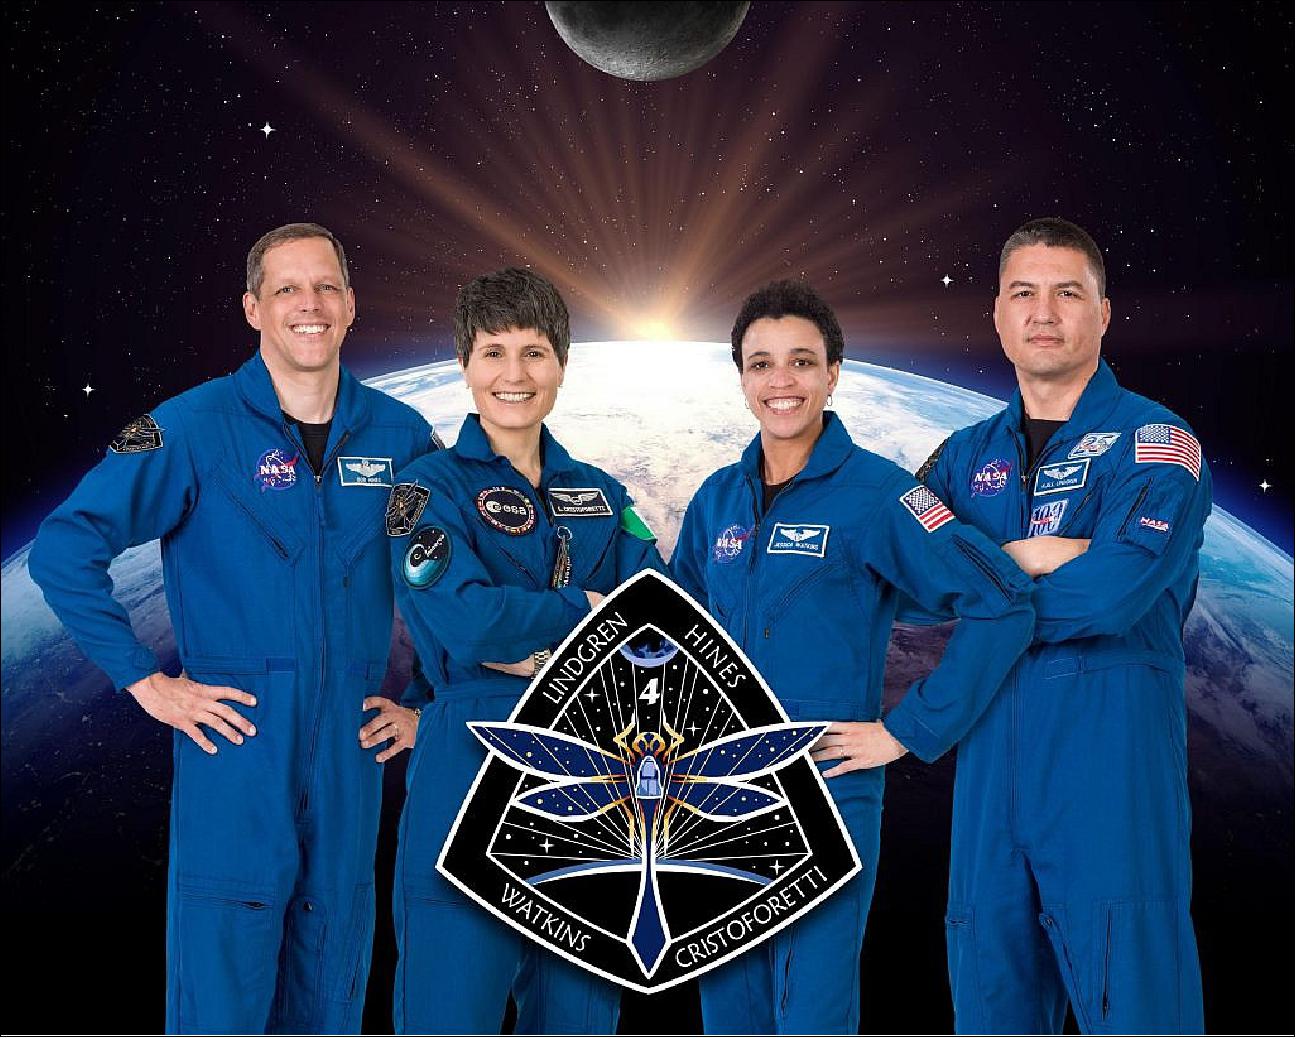 Figure 5: Shown is the official crew portrait of SpaceX Crew-4 astronauts and insignia, representing NASA’s Commercial Crew Program. From left are Pilot Robert Hines, Mission specialists Samantha Cristoforetti and Jessica Watkins, and Commander Kjell Lindgren. Hines, Watkins, and Lindgren are NASA astronauts; Cristoforetti is an ESA (European Space Agency) astronaut (image credit: NASA)